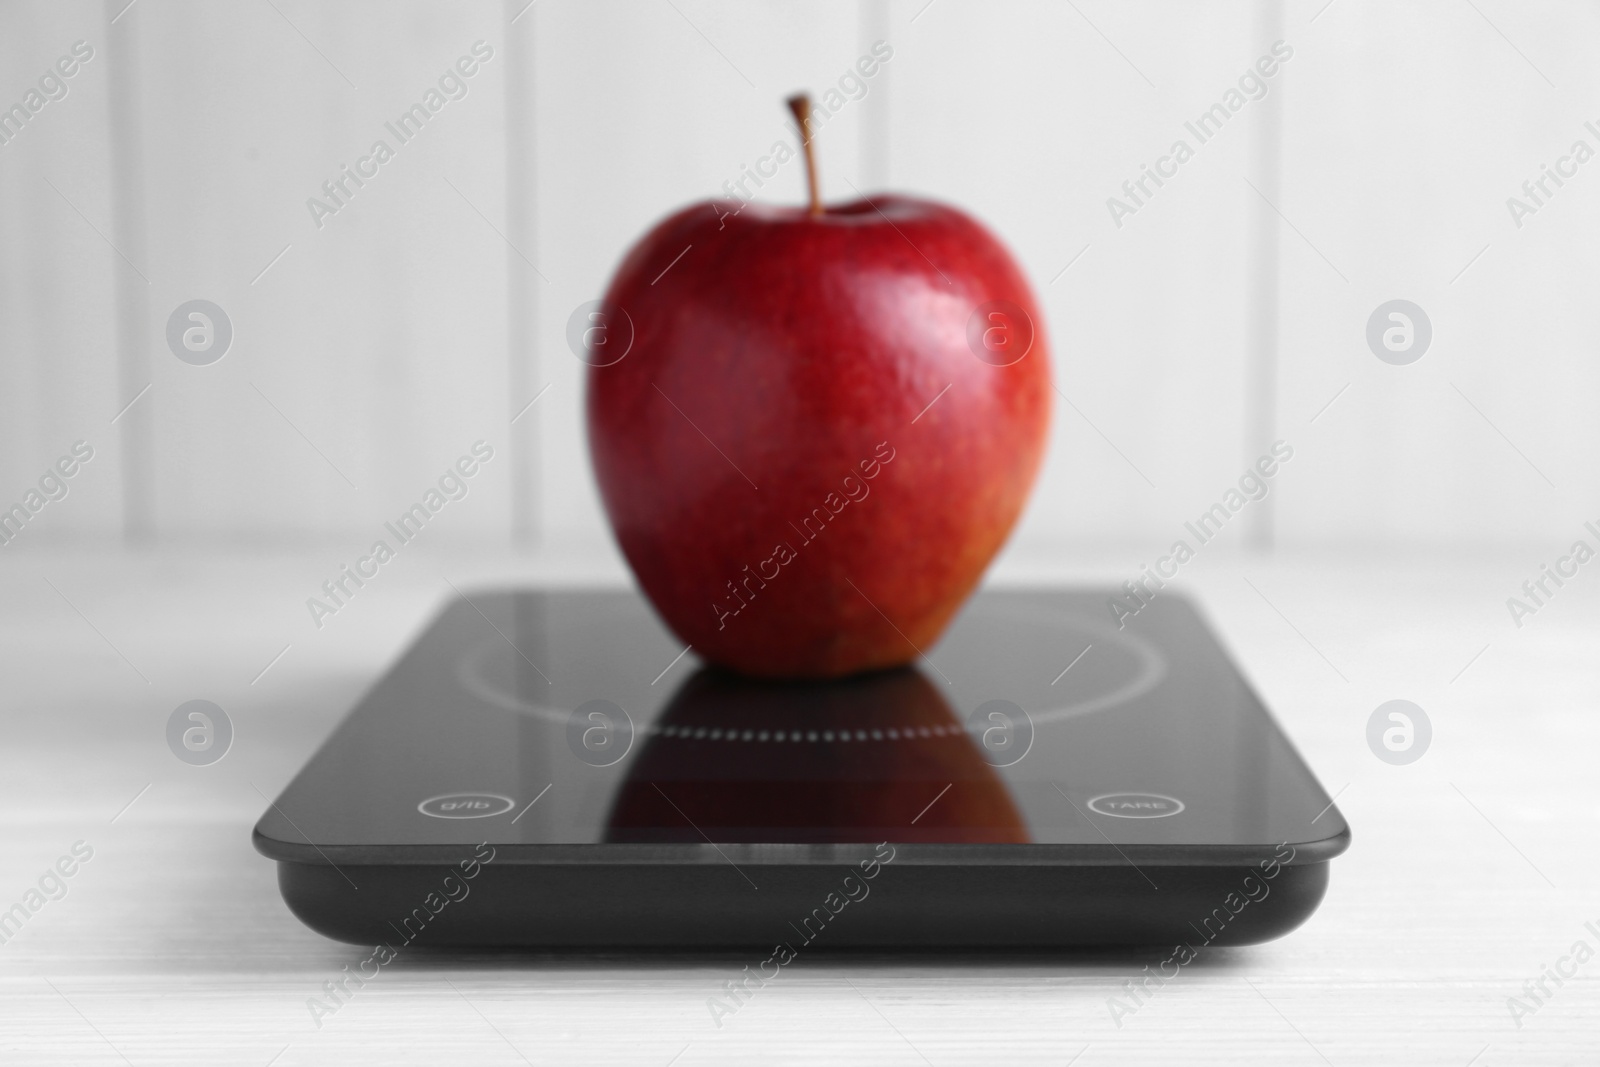 Photo of Digital kitchen scale with ripe red apple on white wooden table